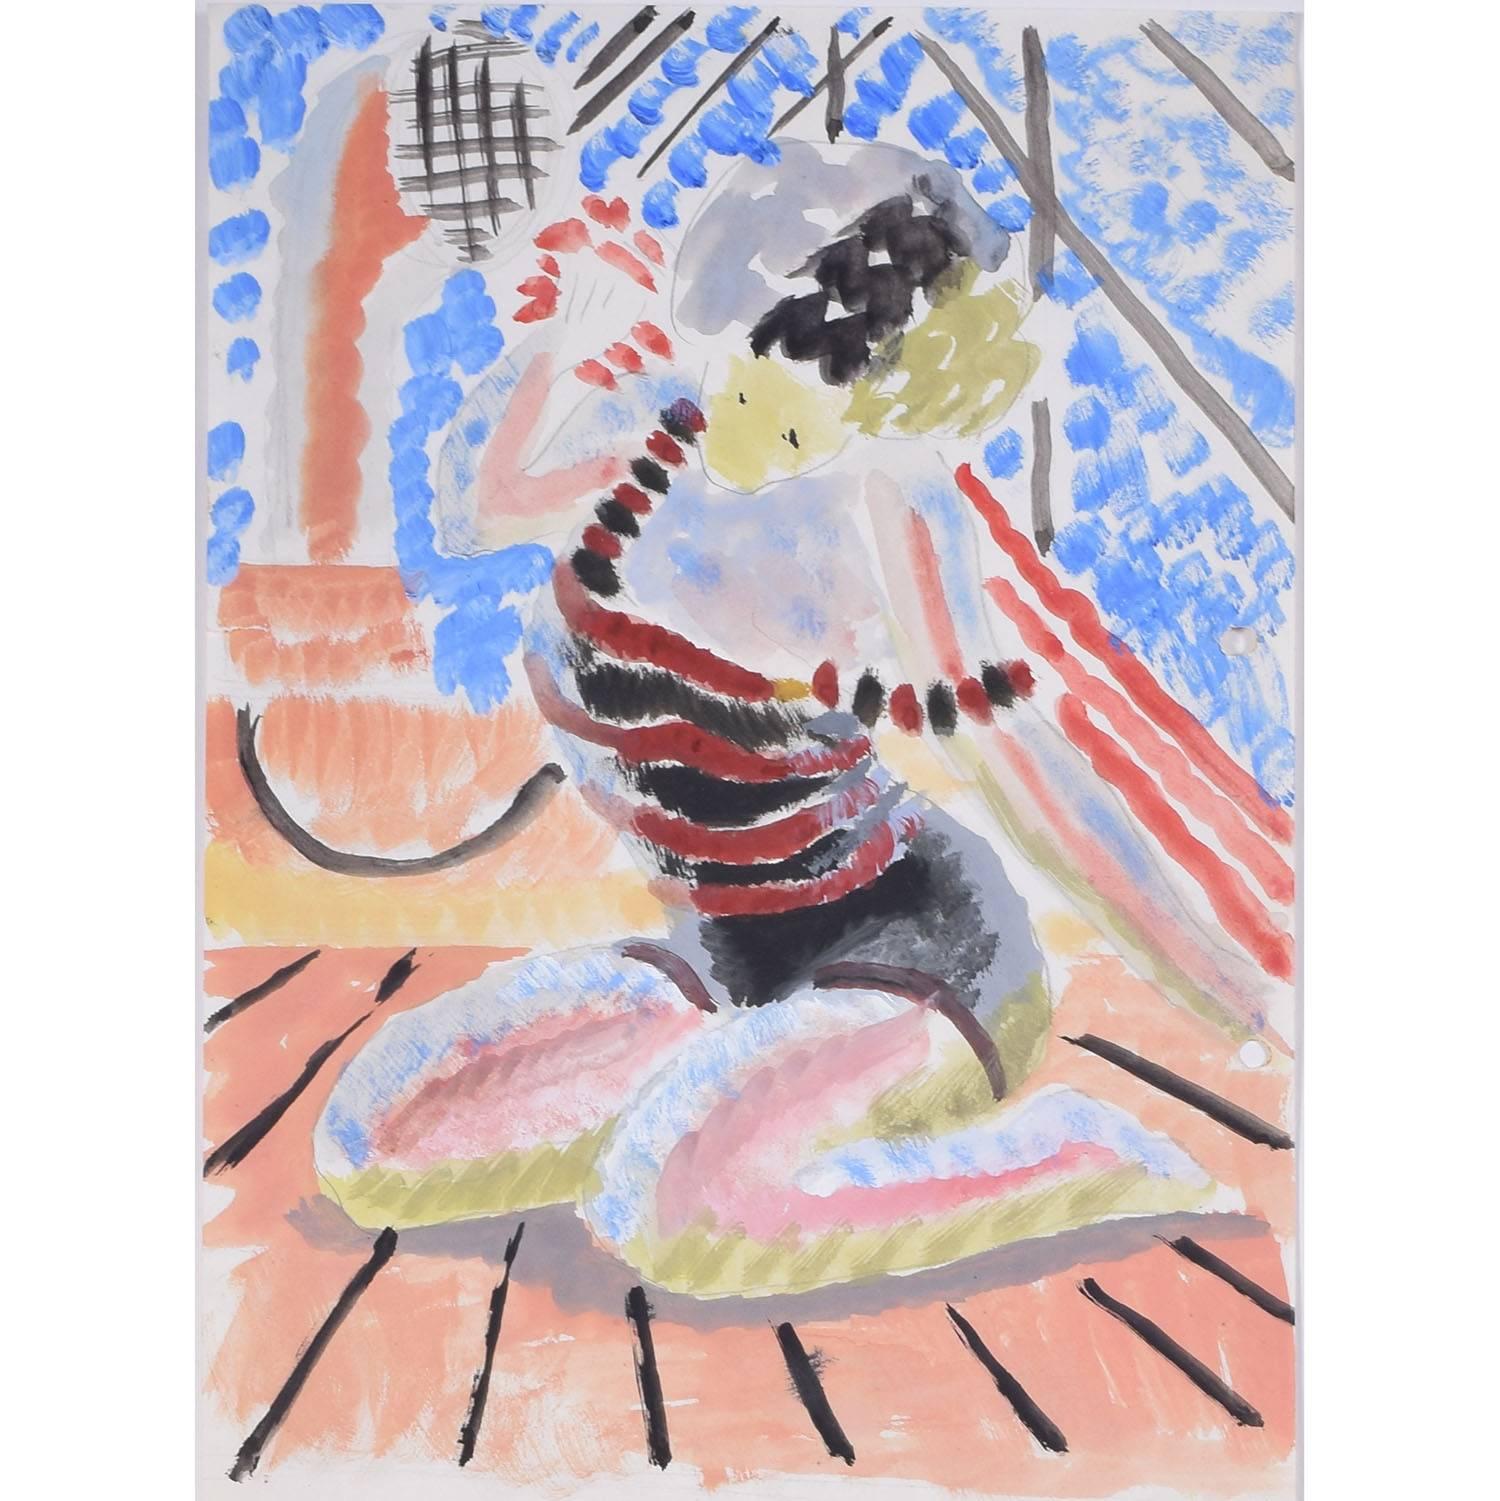 We acquired a series of paintings from Clifford and Rosemary Ellis's studio. To find more scroll down to "More from this Seller" and below it click on "See all from this seller." 

Clifford Ellis (1907-1985)
Kneeling Woman (1934)
Theatrical costume